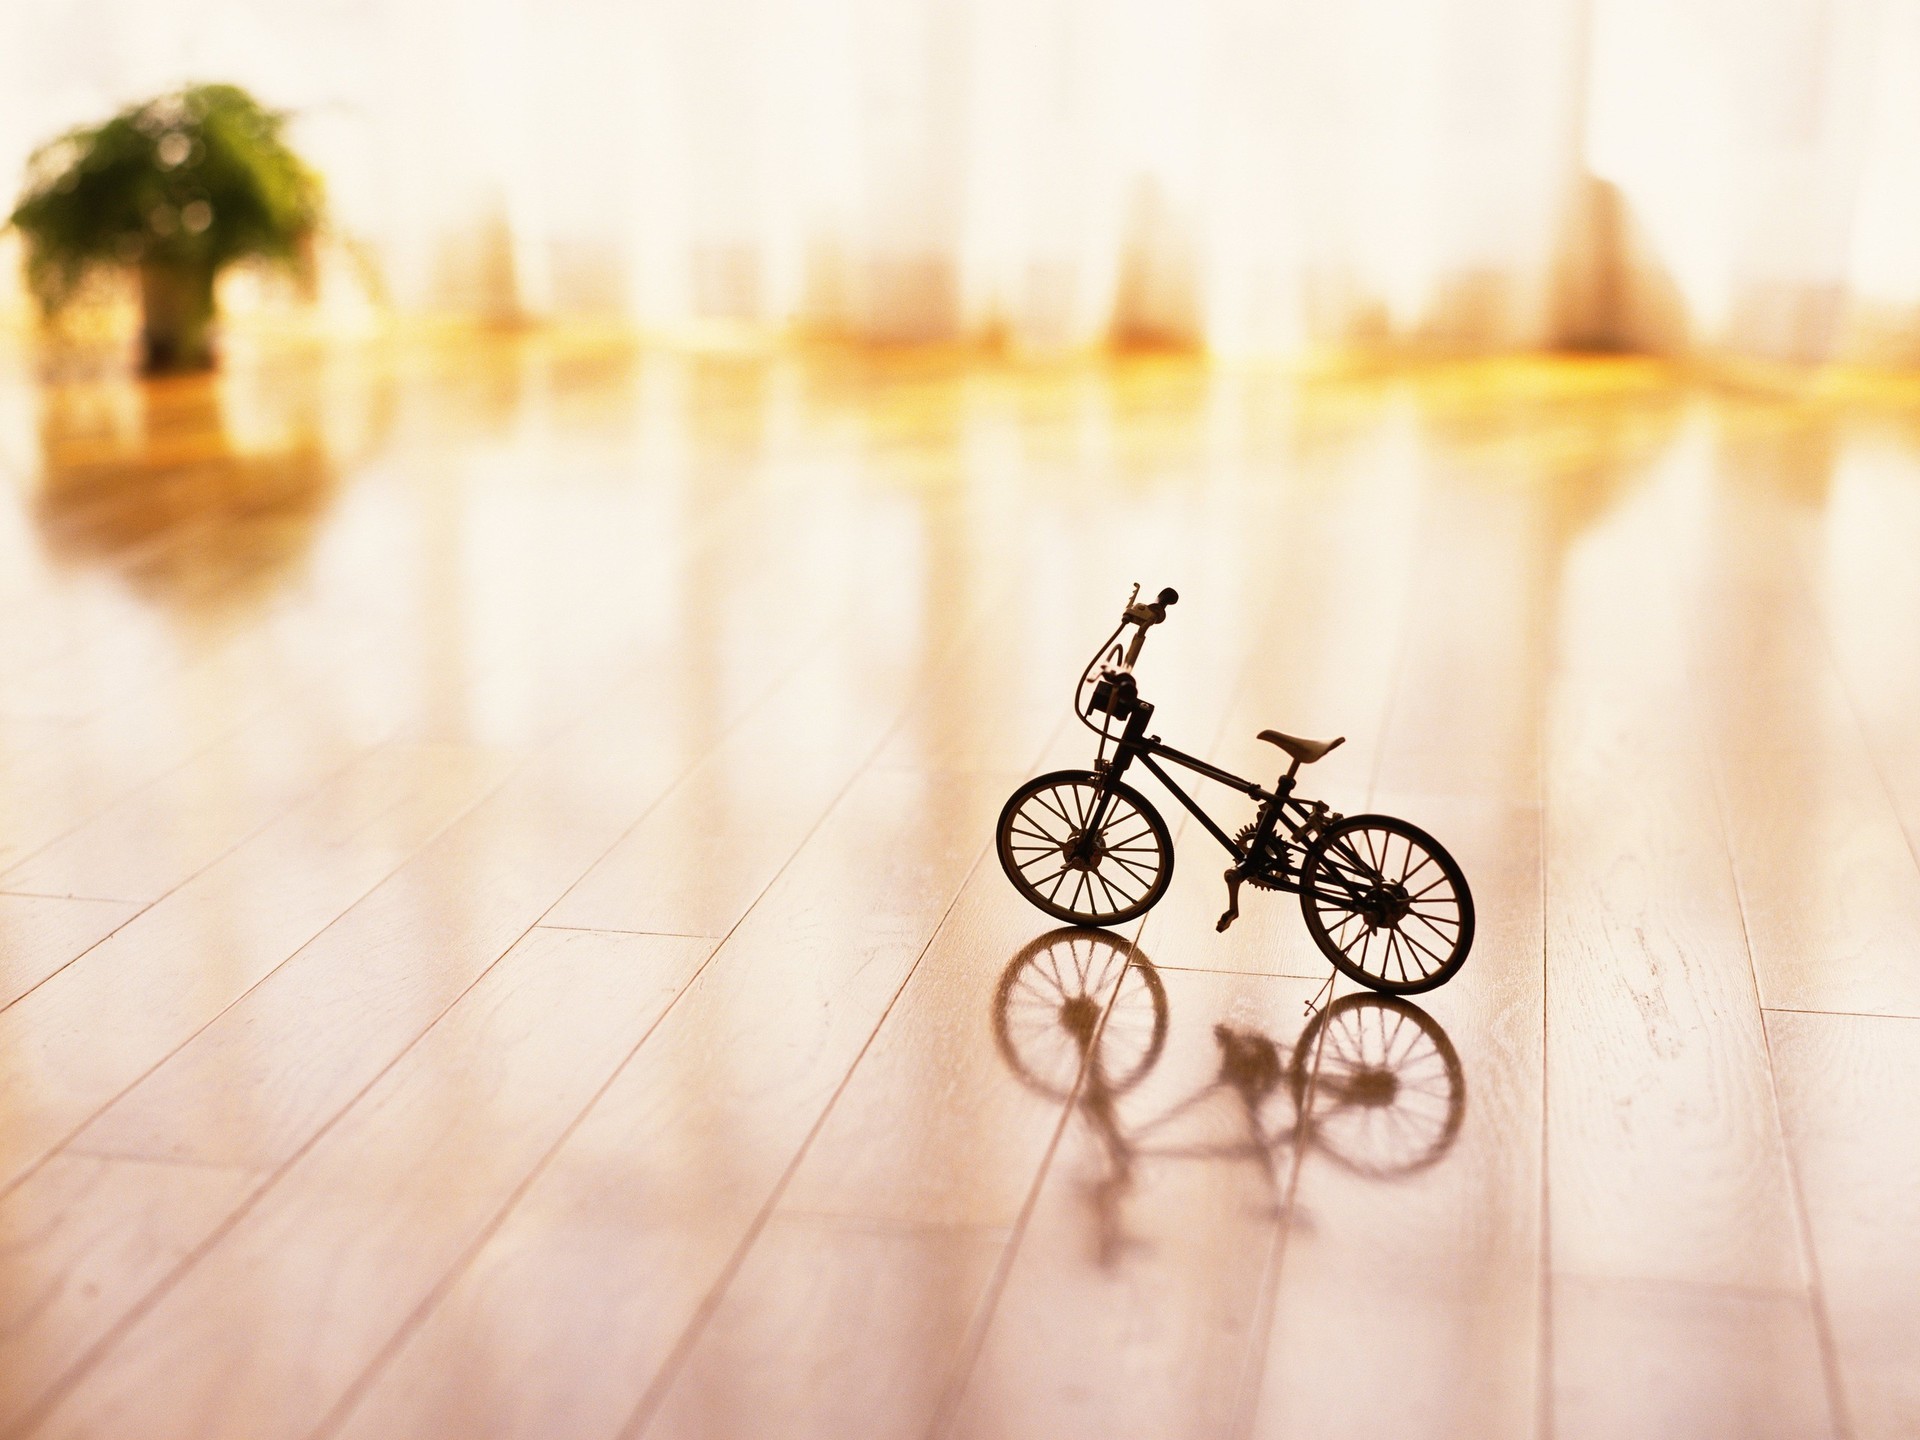 1920x1440 Toy Bicycle Wallpaper 46132